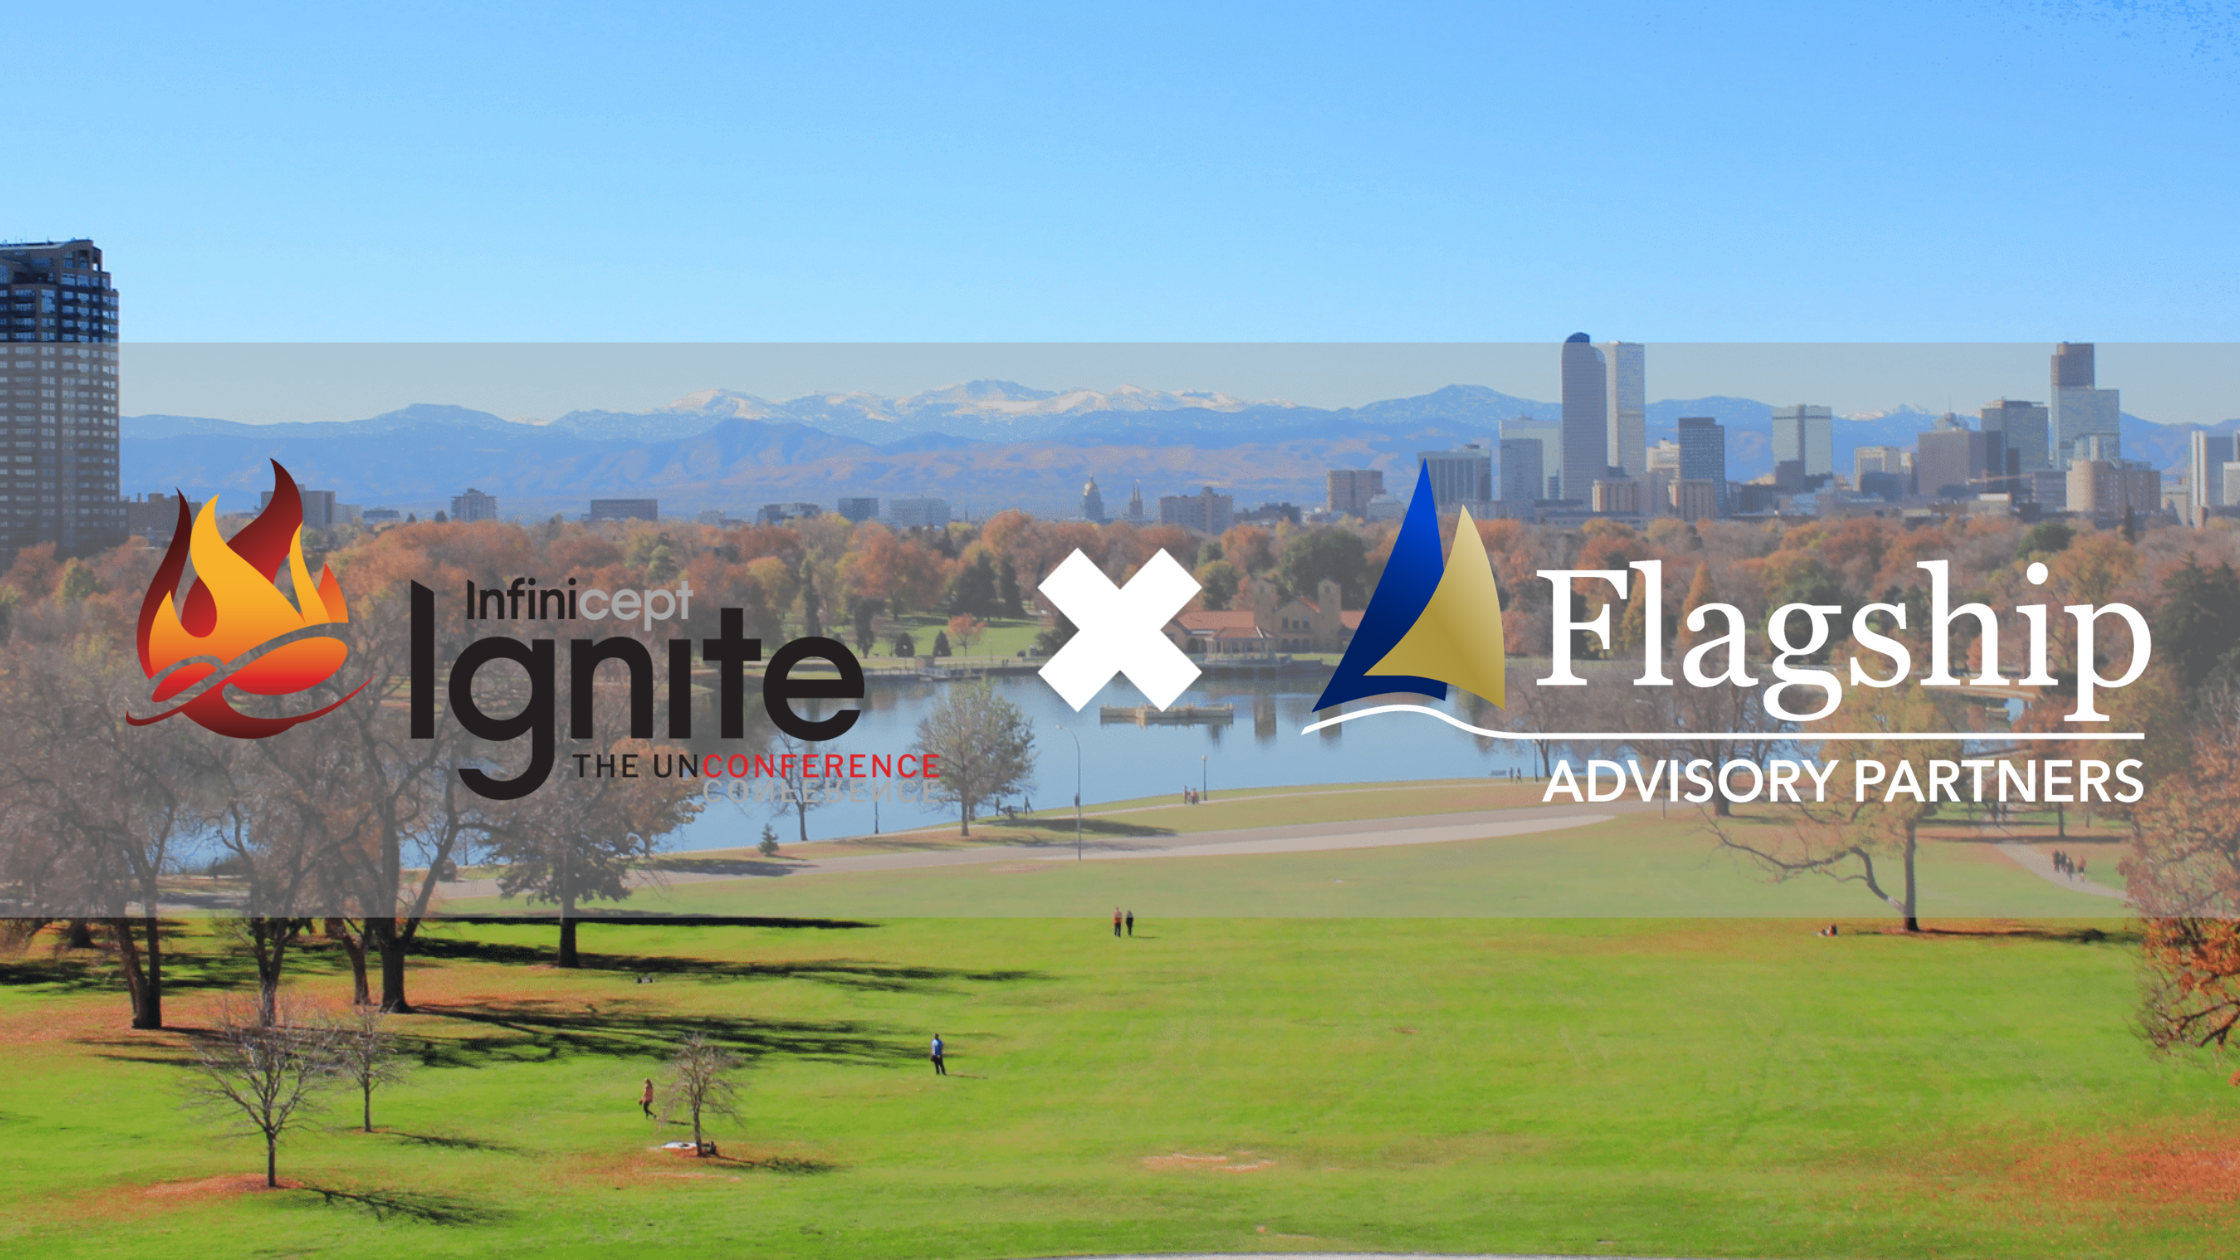 Key Themes and Insights from Infinicept Ignite Conference, Denver, 8–9 August 2022